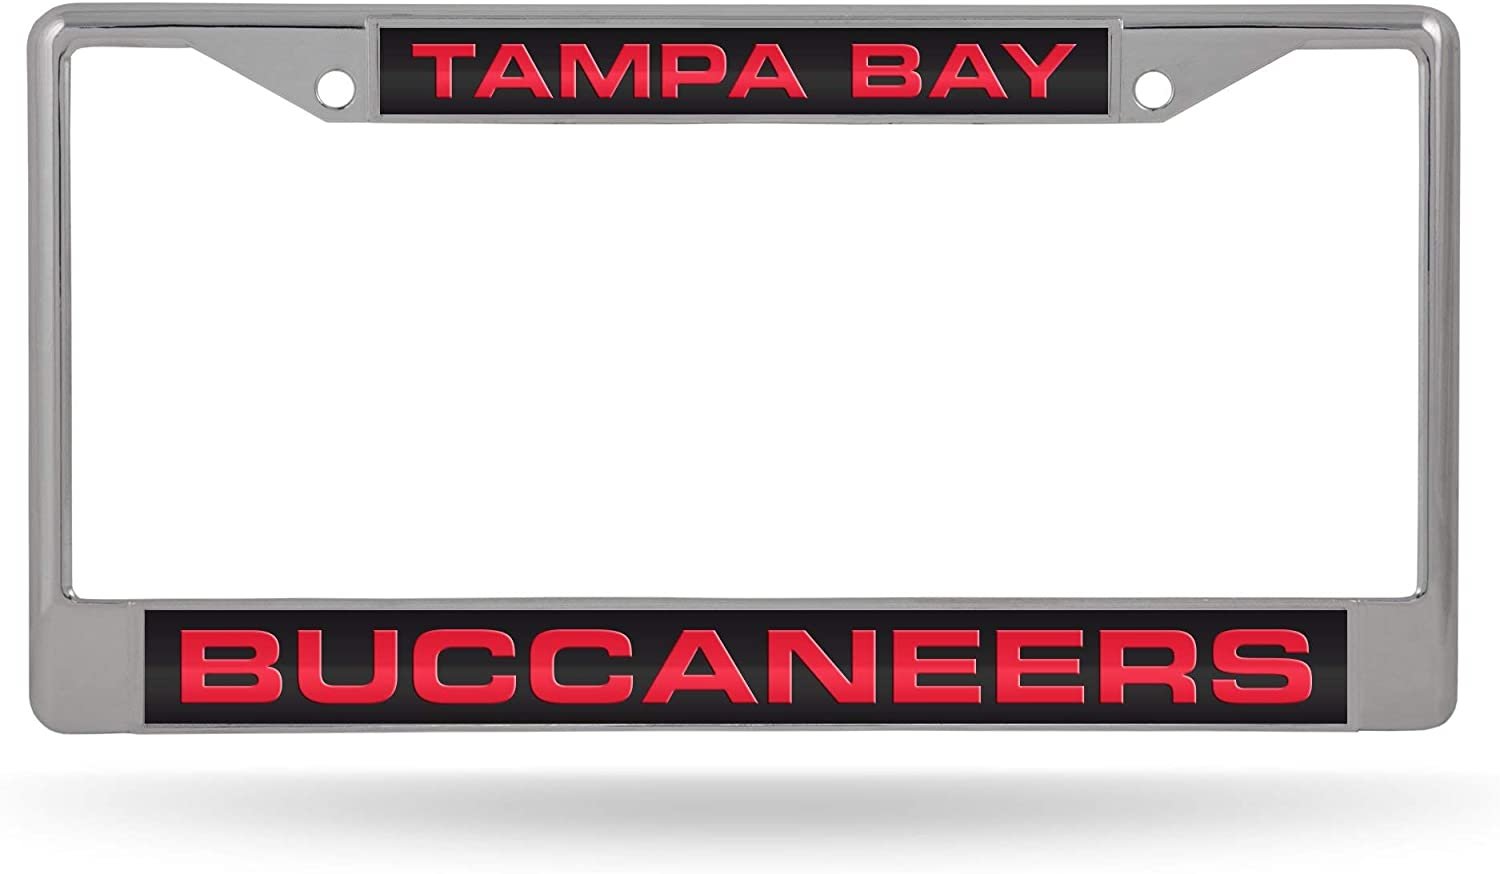 Tampa Bay Buccaneers Metal License Plate Frame Chrome Tag Cover, Laser Acrylic Mirrored Inserts, 12x6 Inch